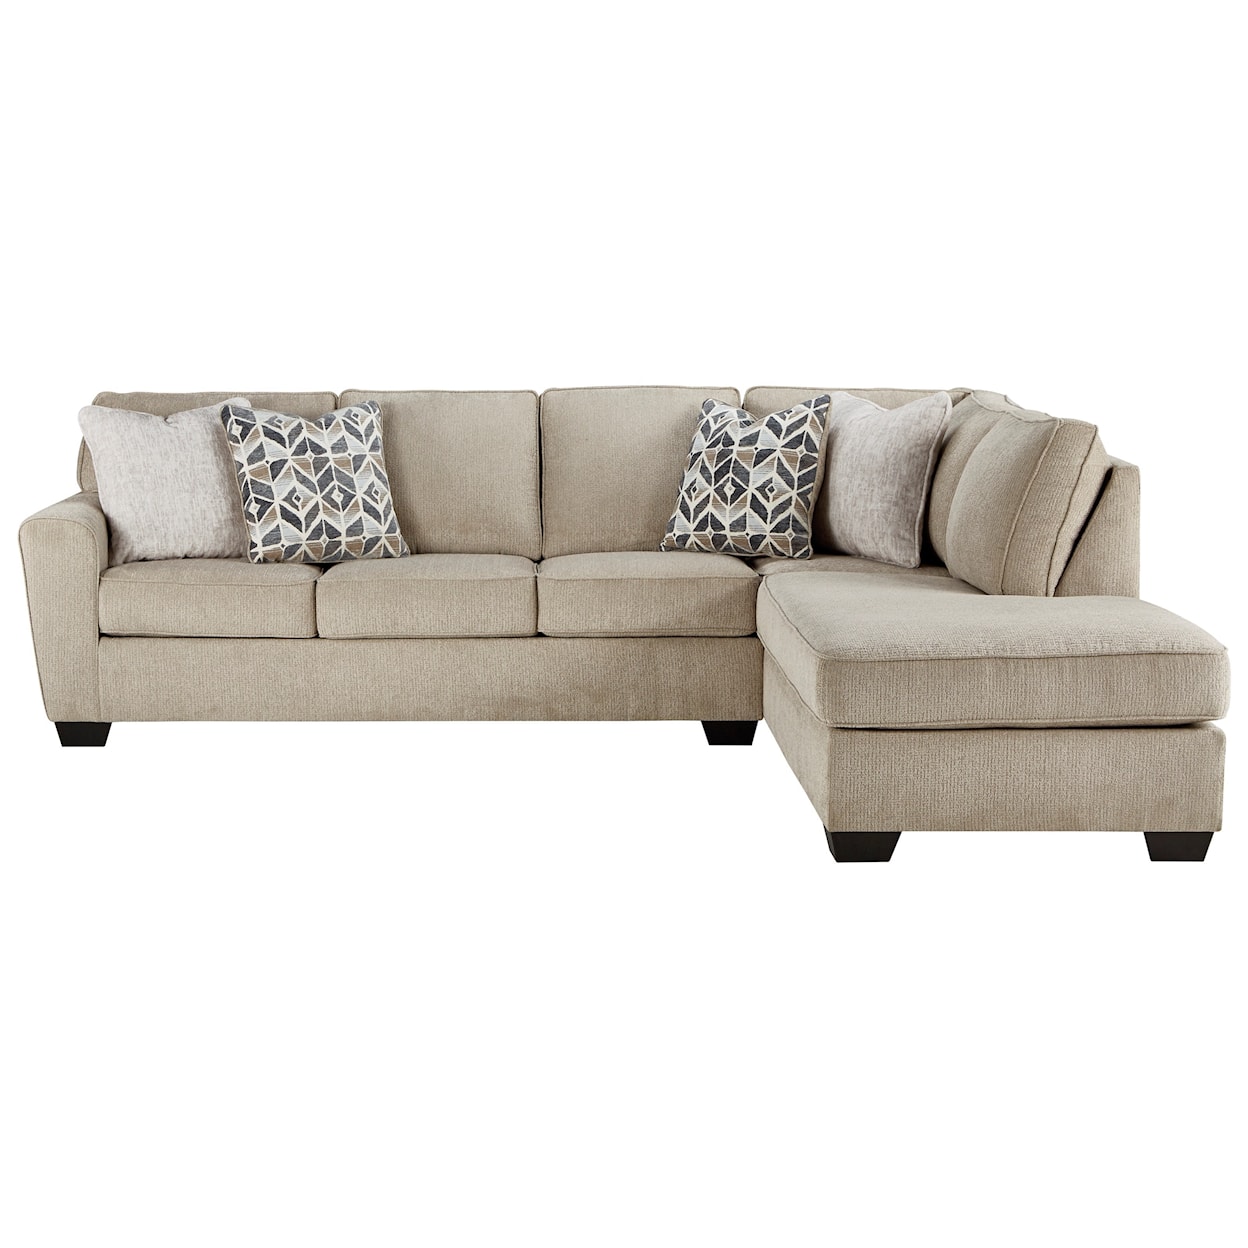 Ashley Furniture Signature Design Decelle 2-Piece Sectional with Chaise